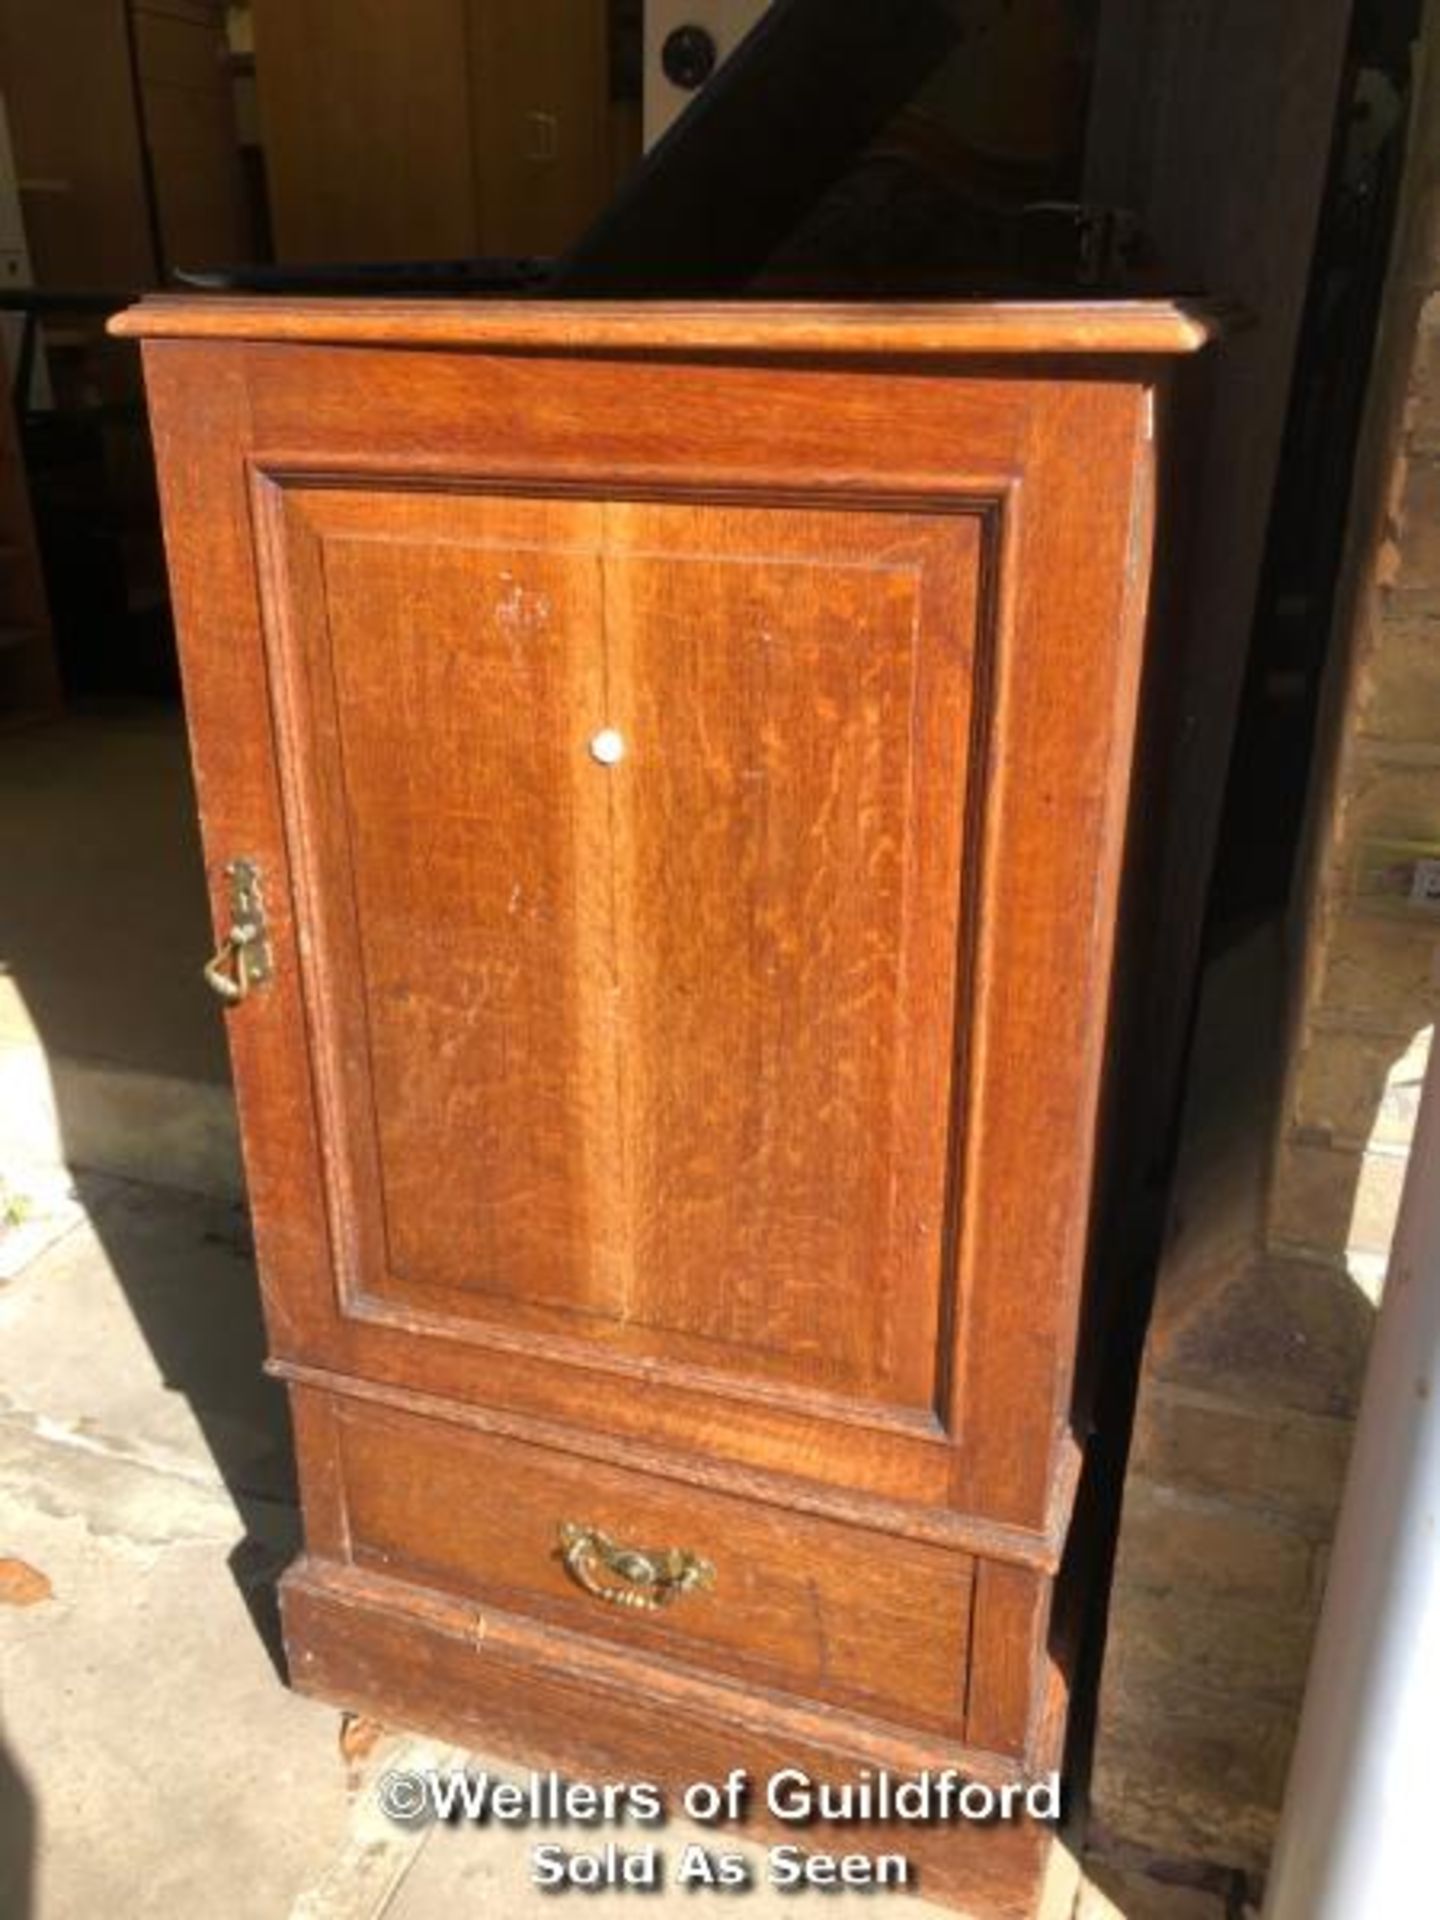 *GEORGE COOPERS LONDON RELIABLE SAFE WITH INTERNAL DRAWER AND KEY HIDDEN WITHIN CABINET - SAFE - Bild 4 aus 4